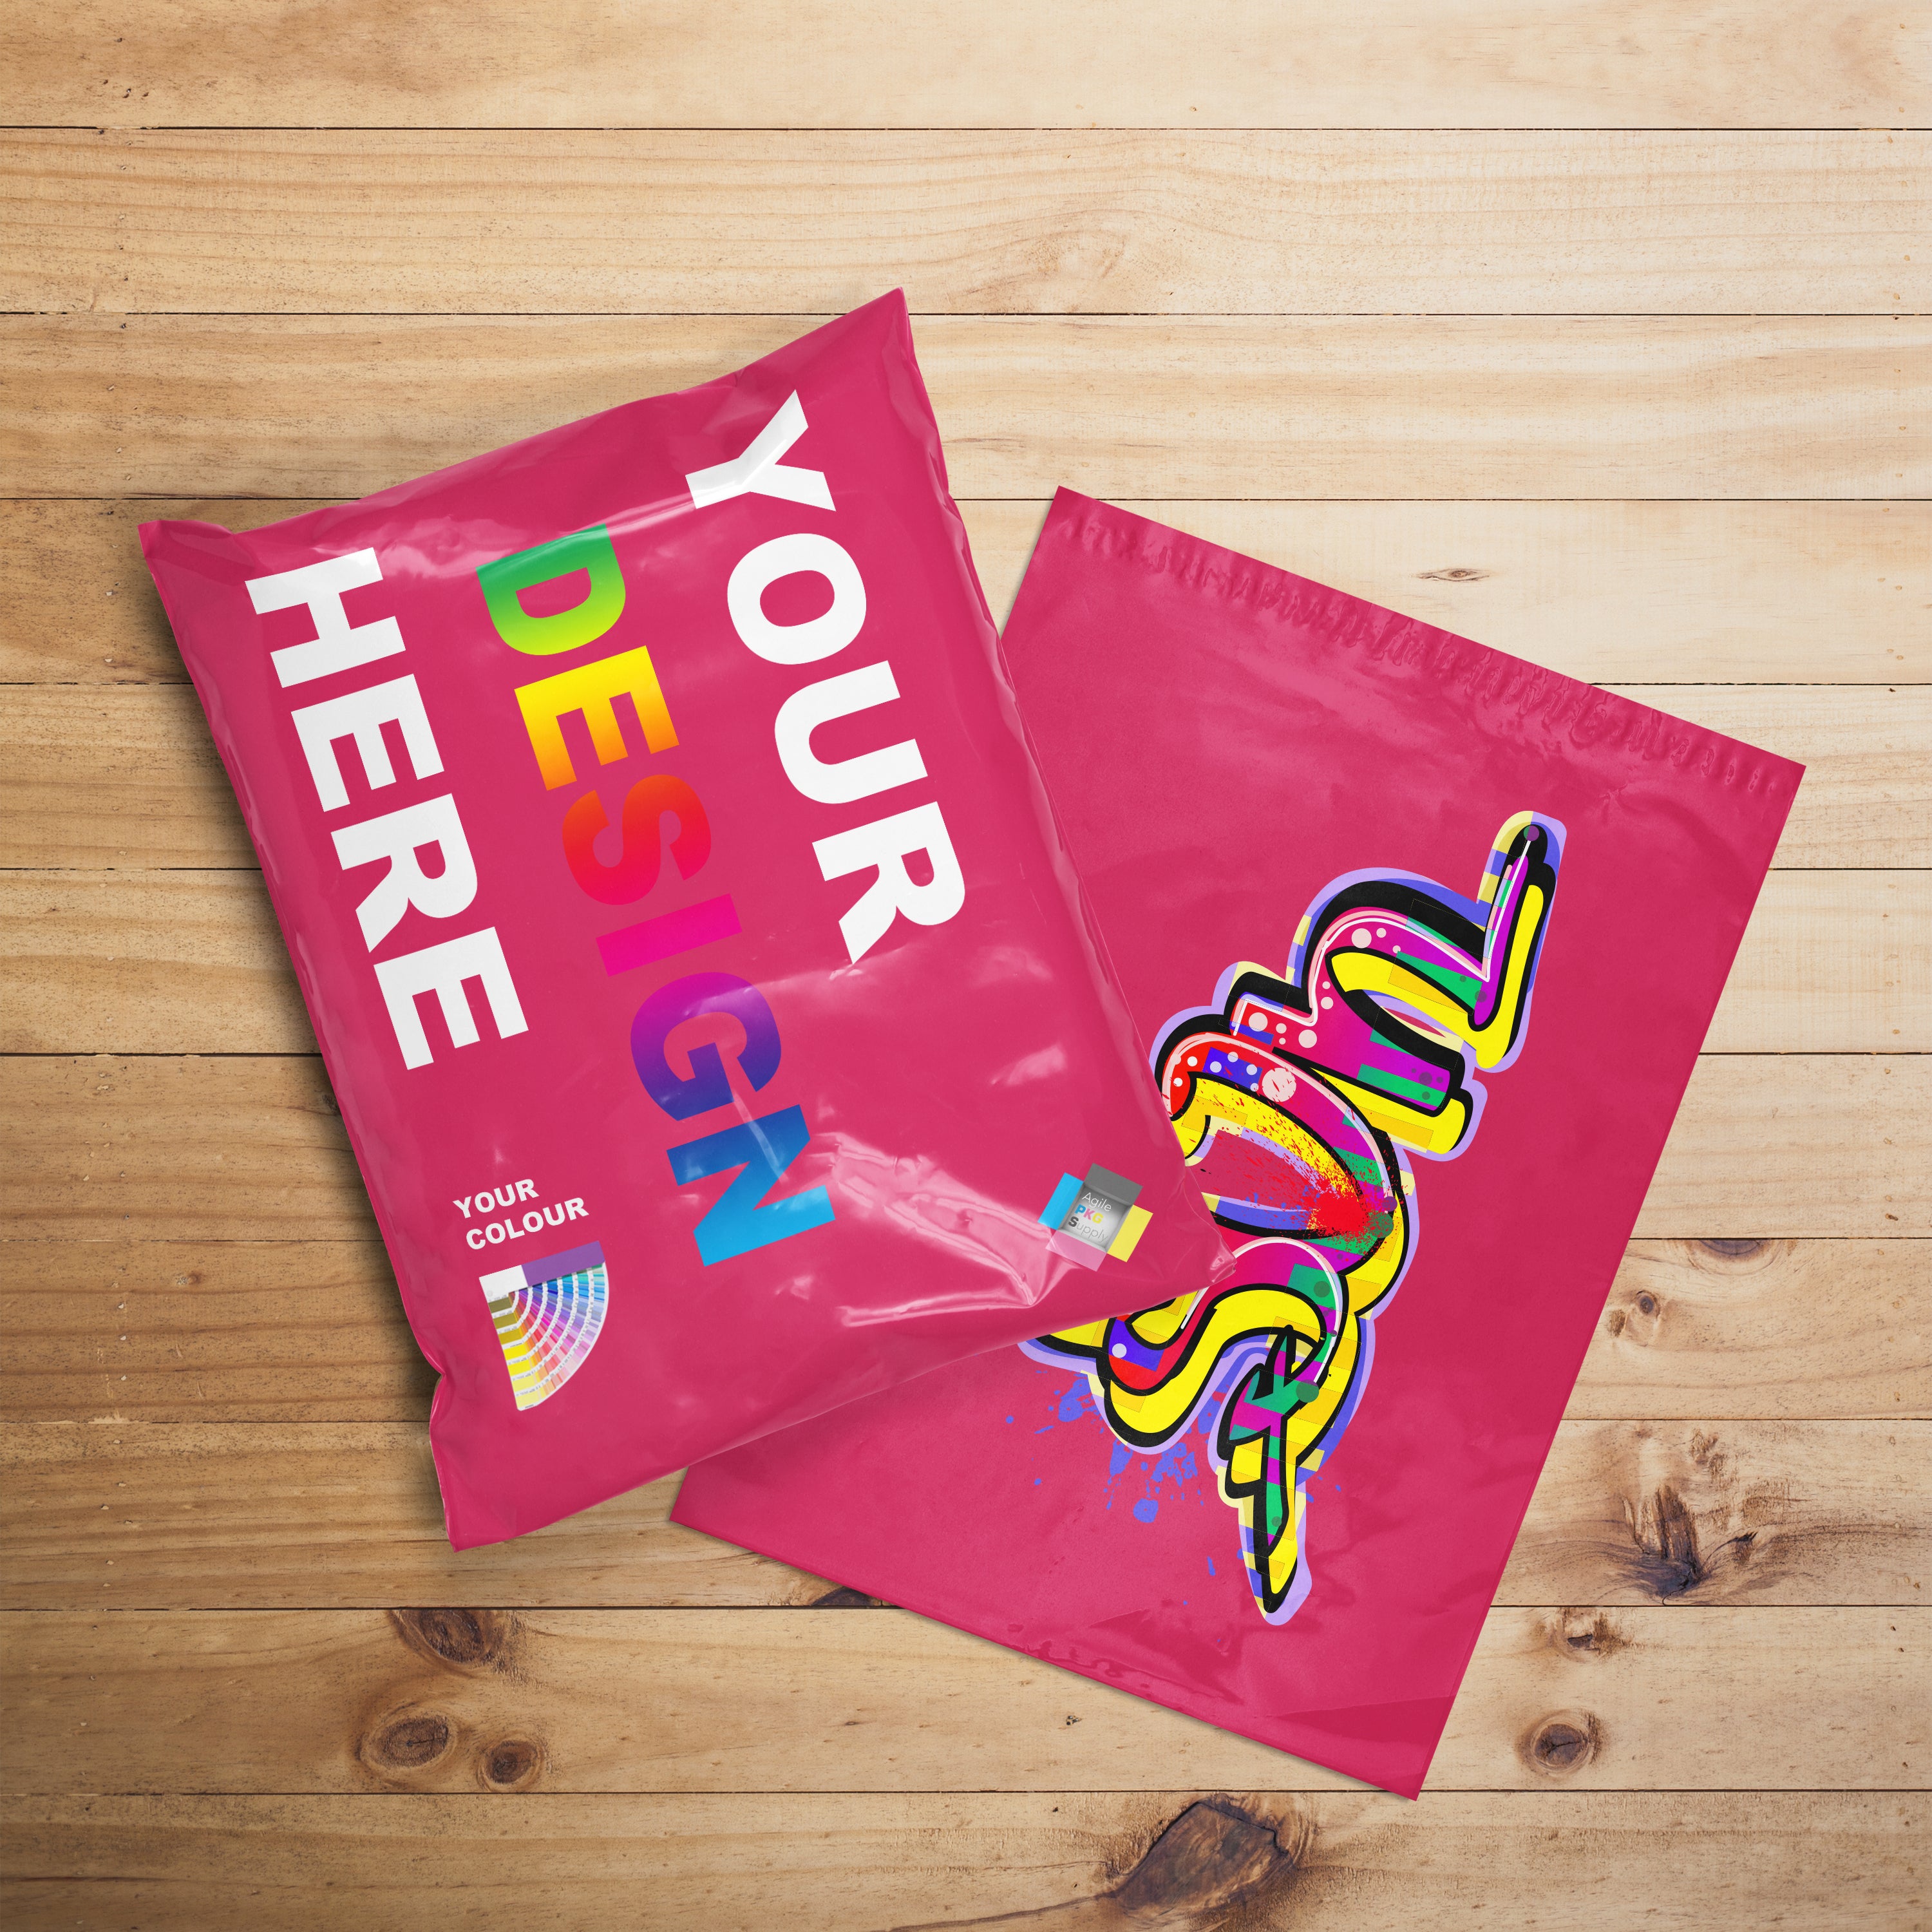 Glossy Hot Pink Poly Mailers